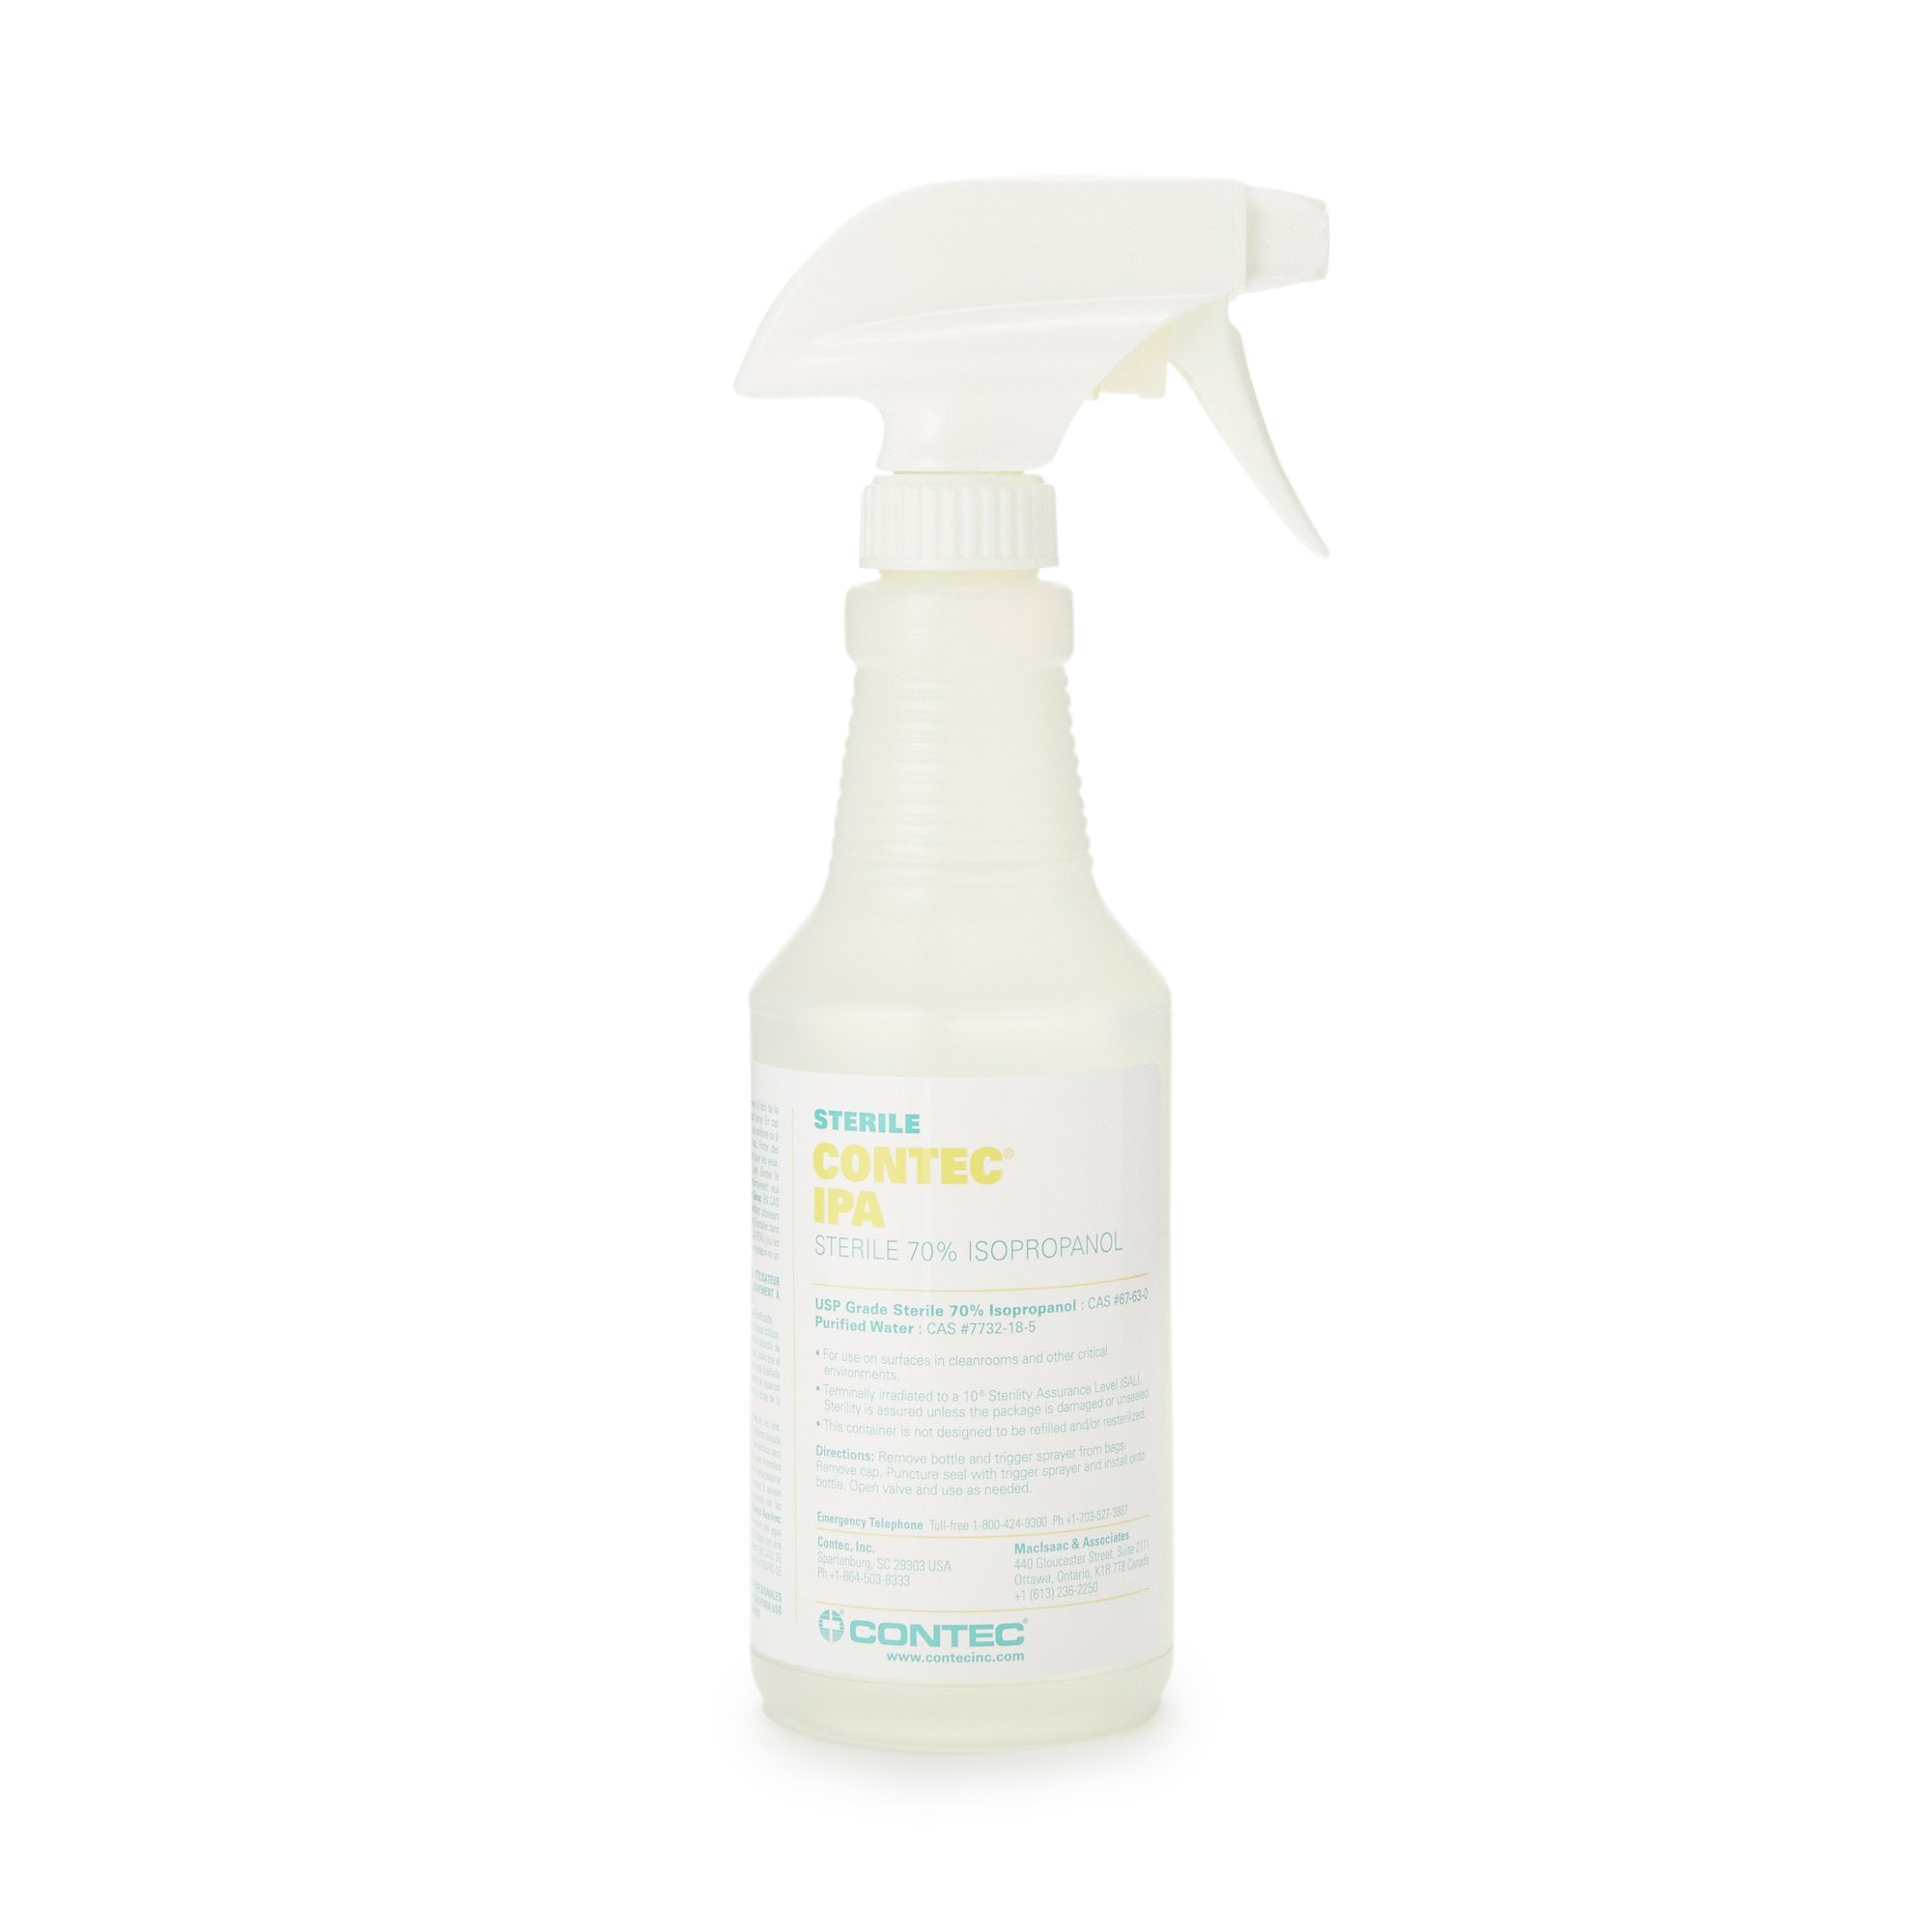 Contec® Surface Disinfectant Cleaner Alcohol Based Trigger Spray Liquid 16 oz. Bottle Alcohol Scent Sterile